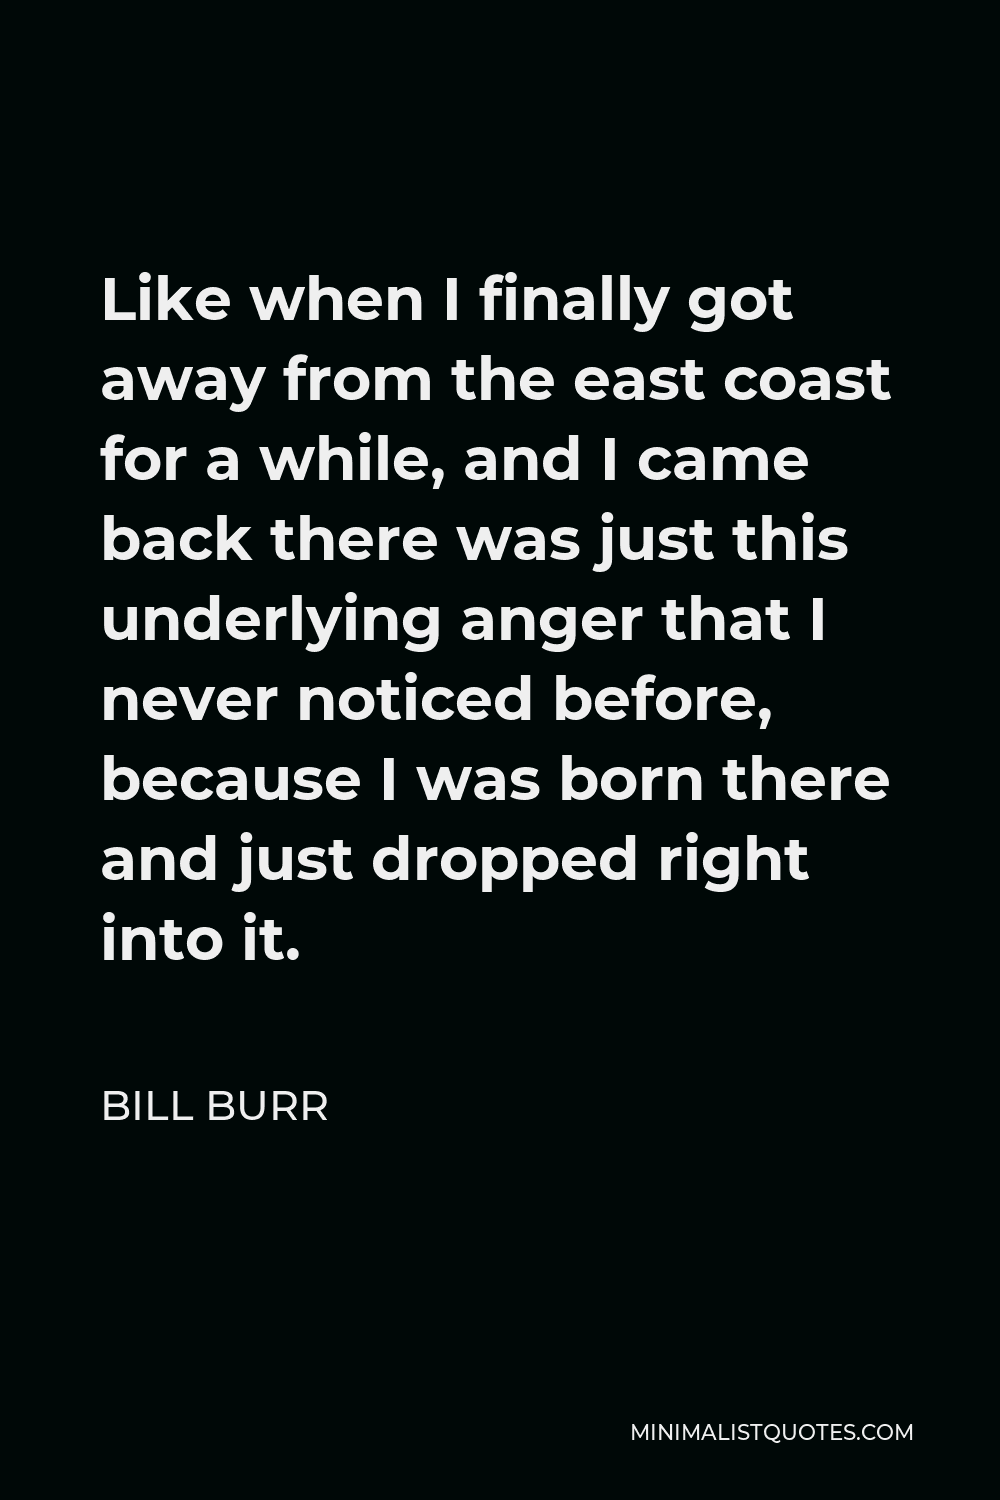 Bill Burr Quote - Like when I finally got away from the east coast for a while, and I came back there was just this underlying anger that I never noticed before, because I was born there and just dropped right into it.